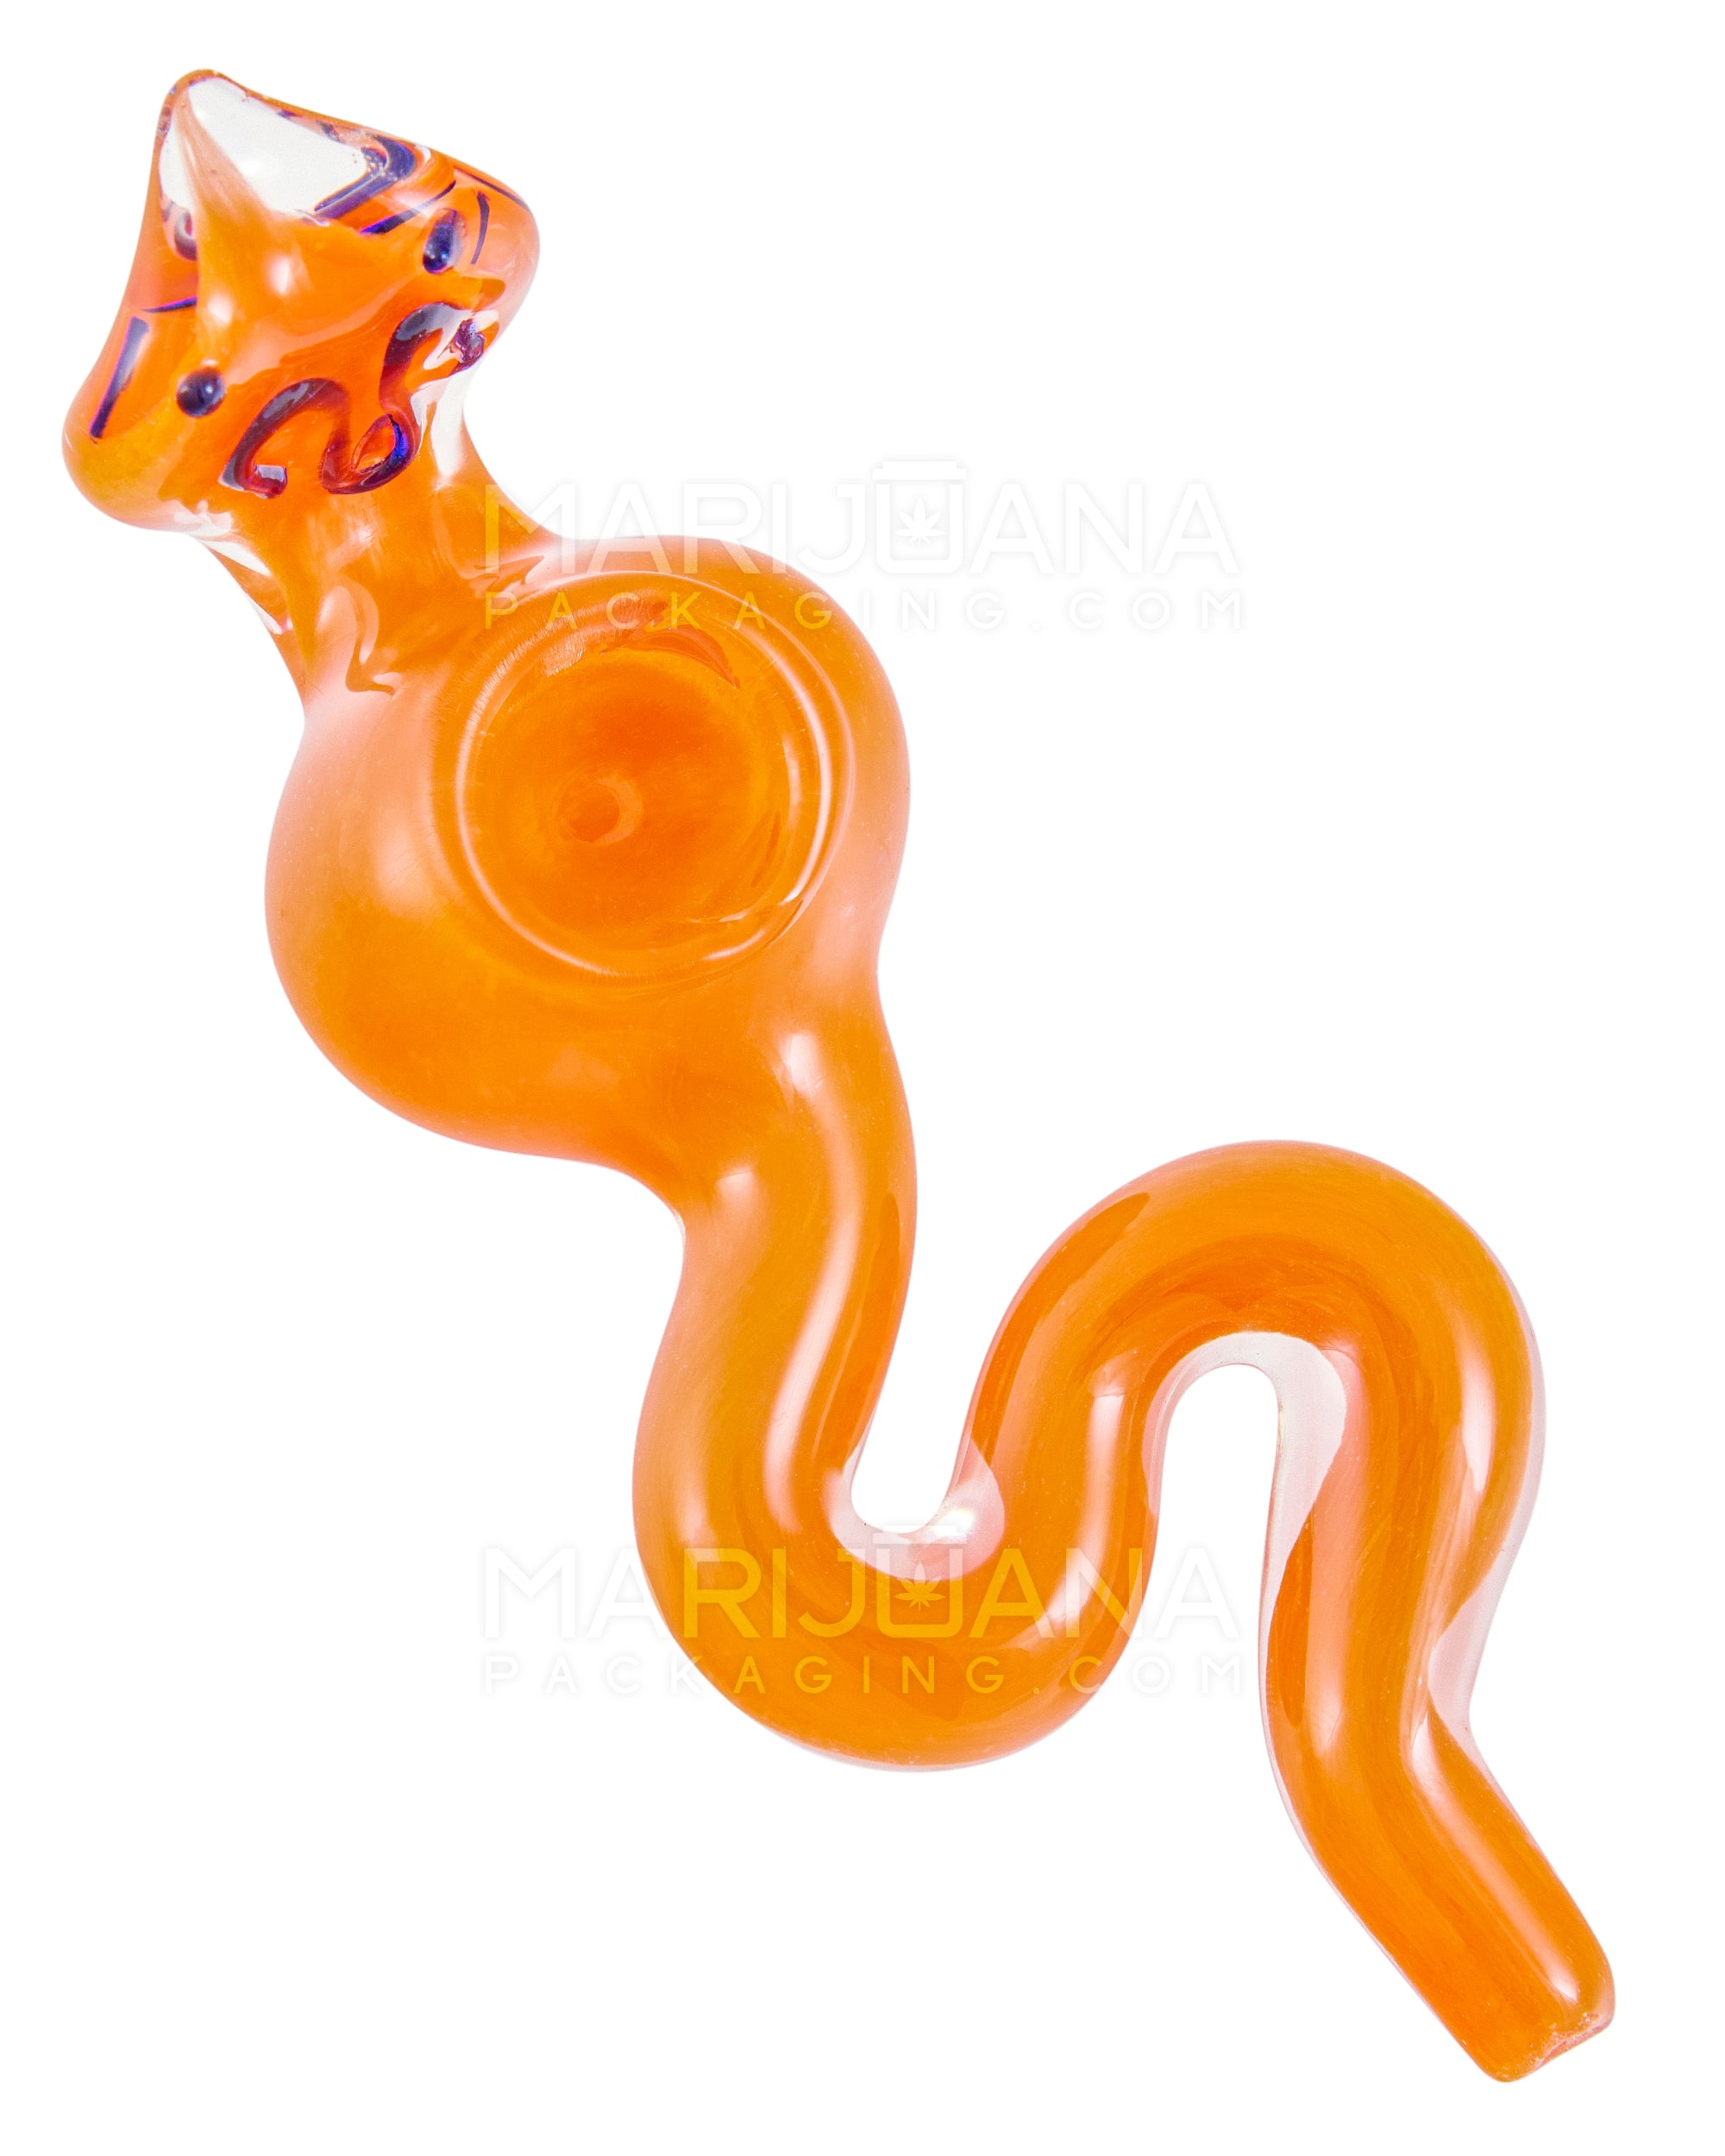 Frit Snake Hand Pipe w/ Swirls | 5in Long - Glass - Assorted - 1